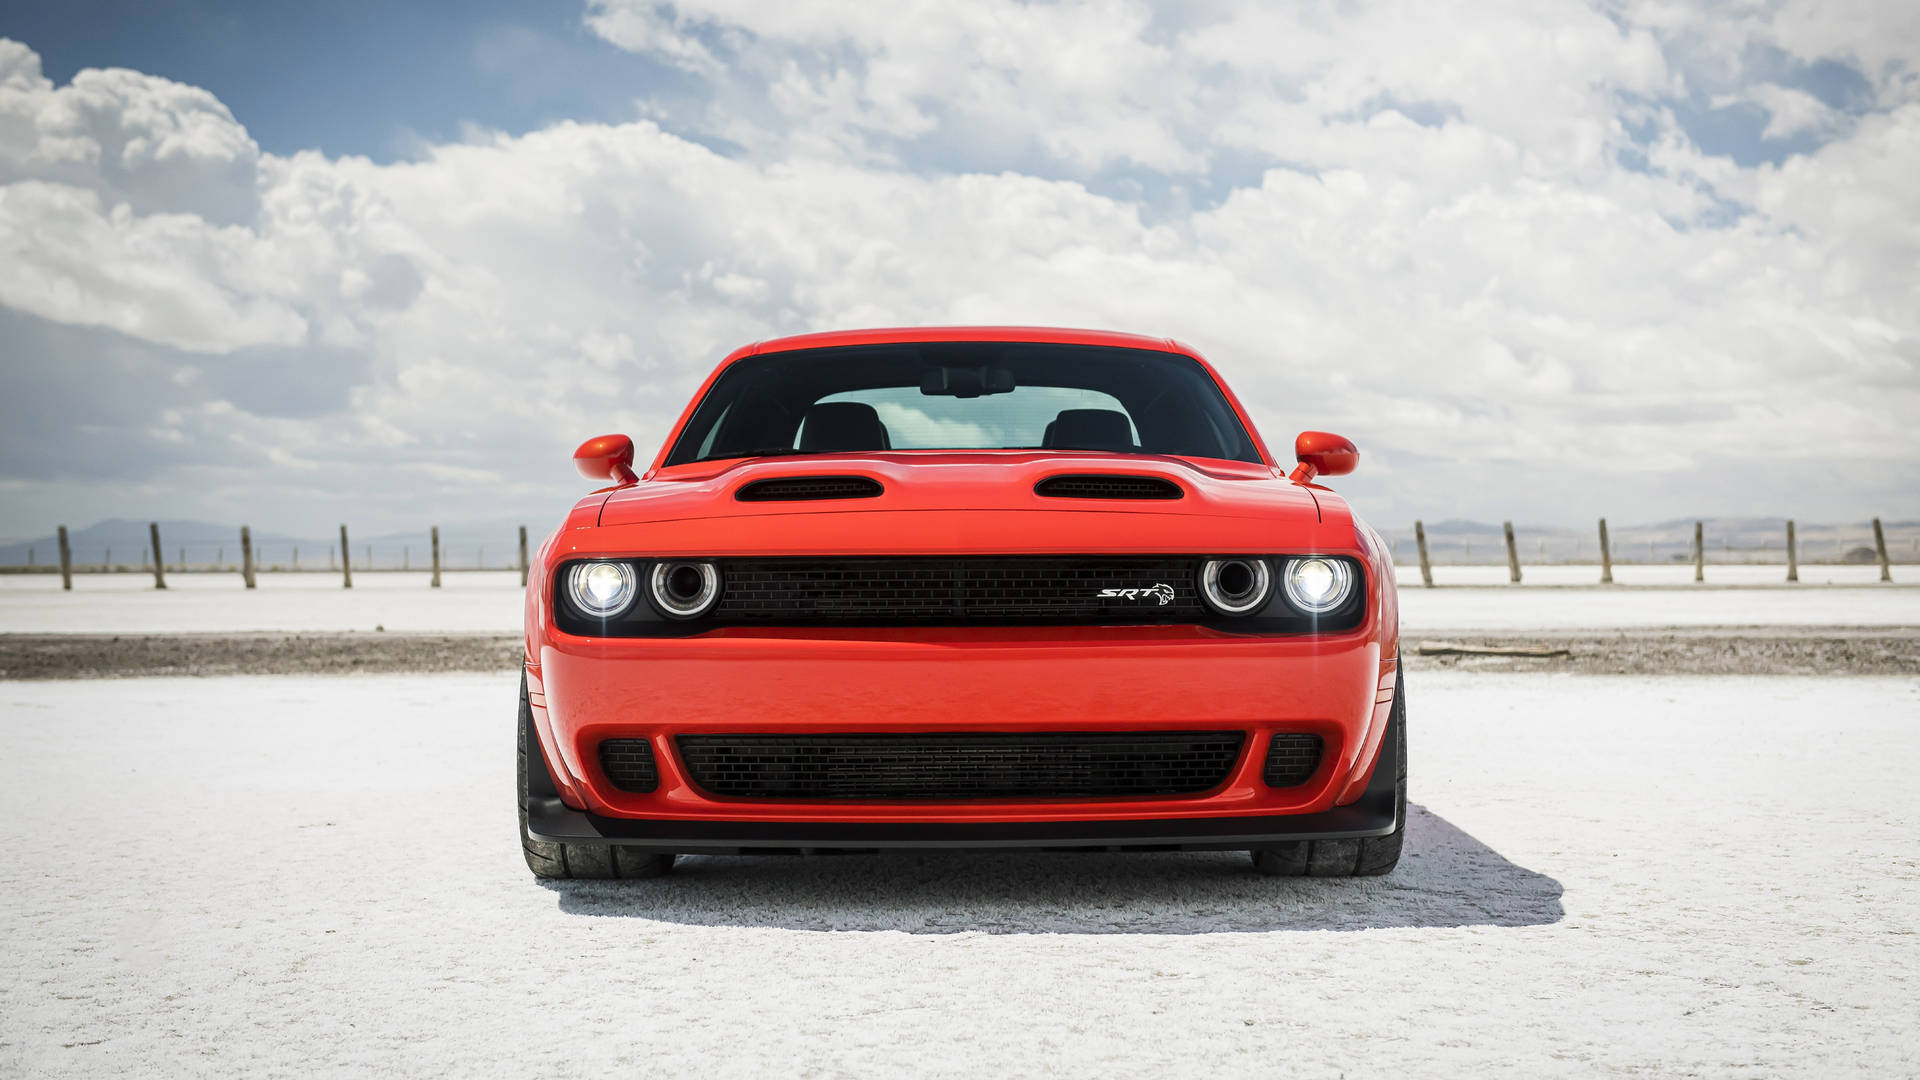 Power Unleashed - The Dodge Challenger: A True Embodiment Of Muscle And Style.